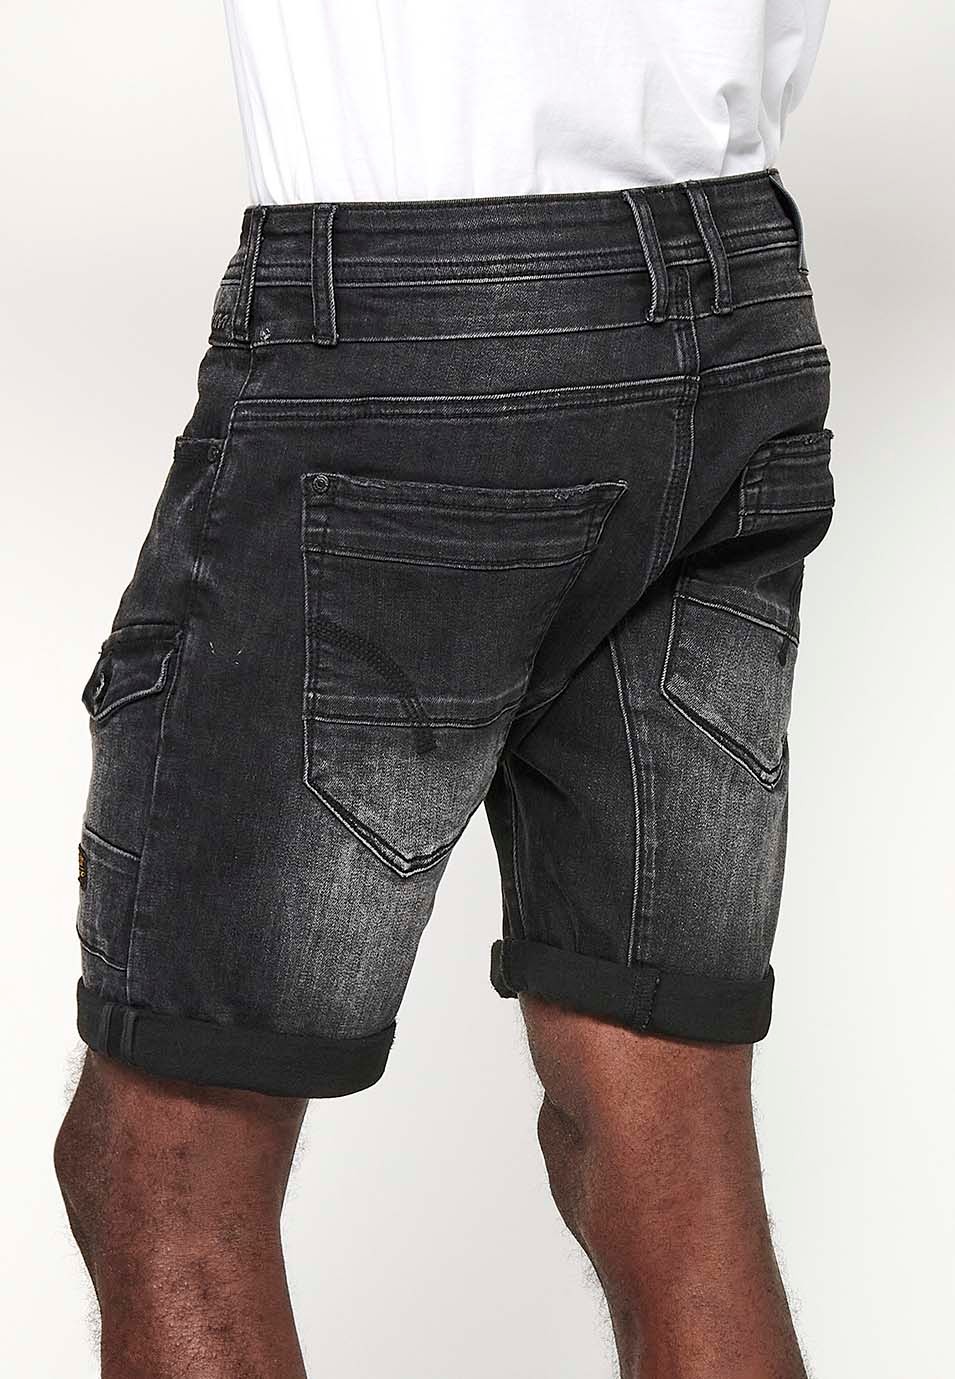 Shorts with Turn-up Finish and Front Closure with Zipper and Button with Five Pockets, One Pocket Pocket and Front Details in Black for Men 8